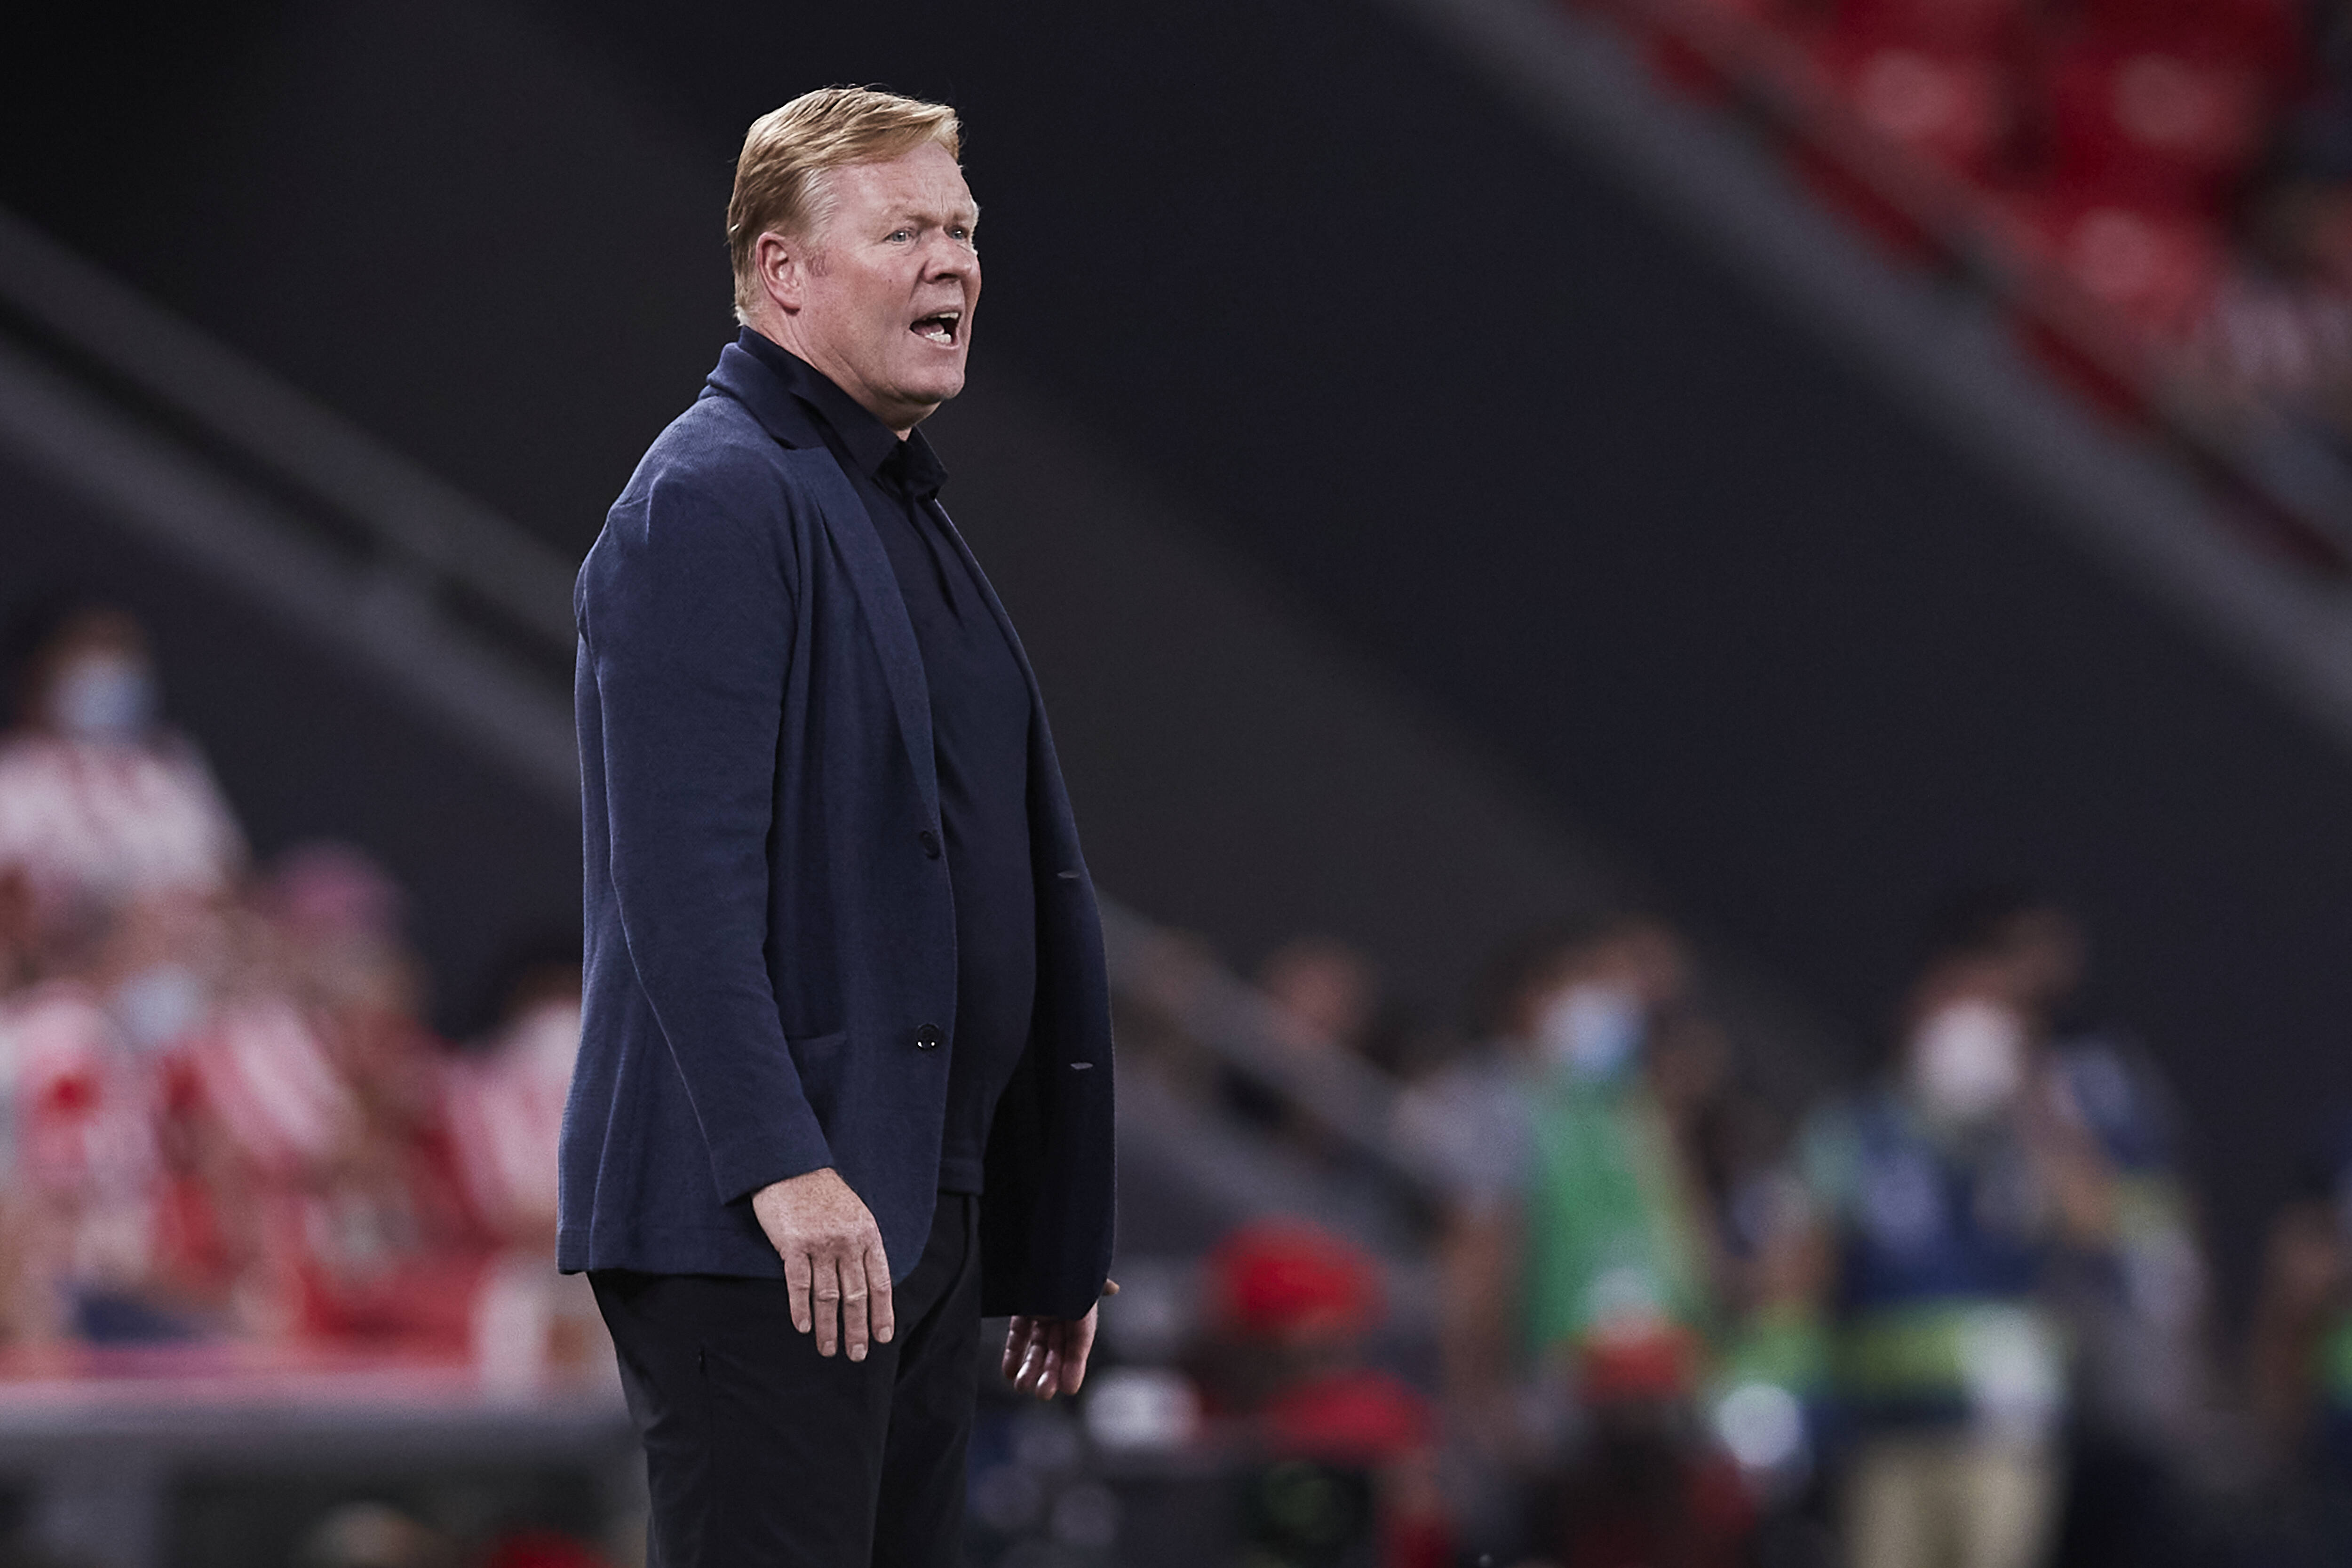 Ronald Koeman: “Today we’ve shown that we’re not inferior to Real Madrid”